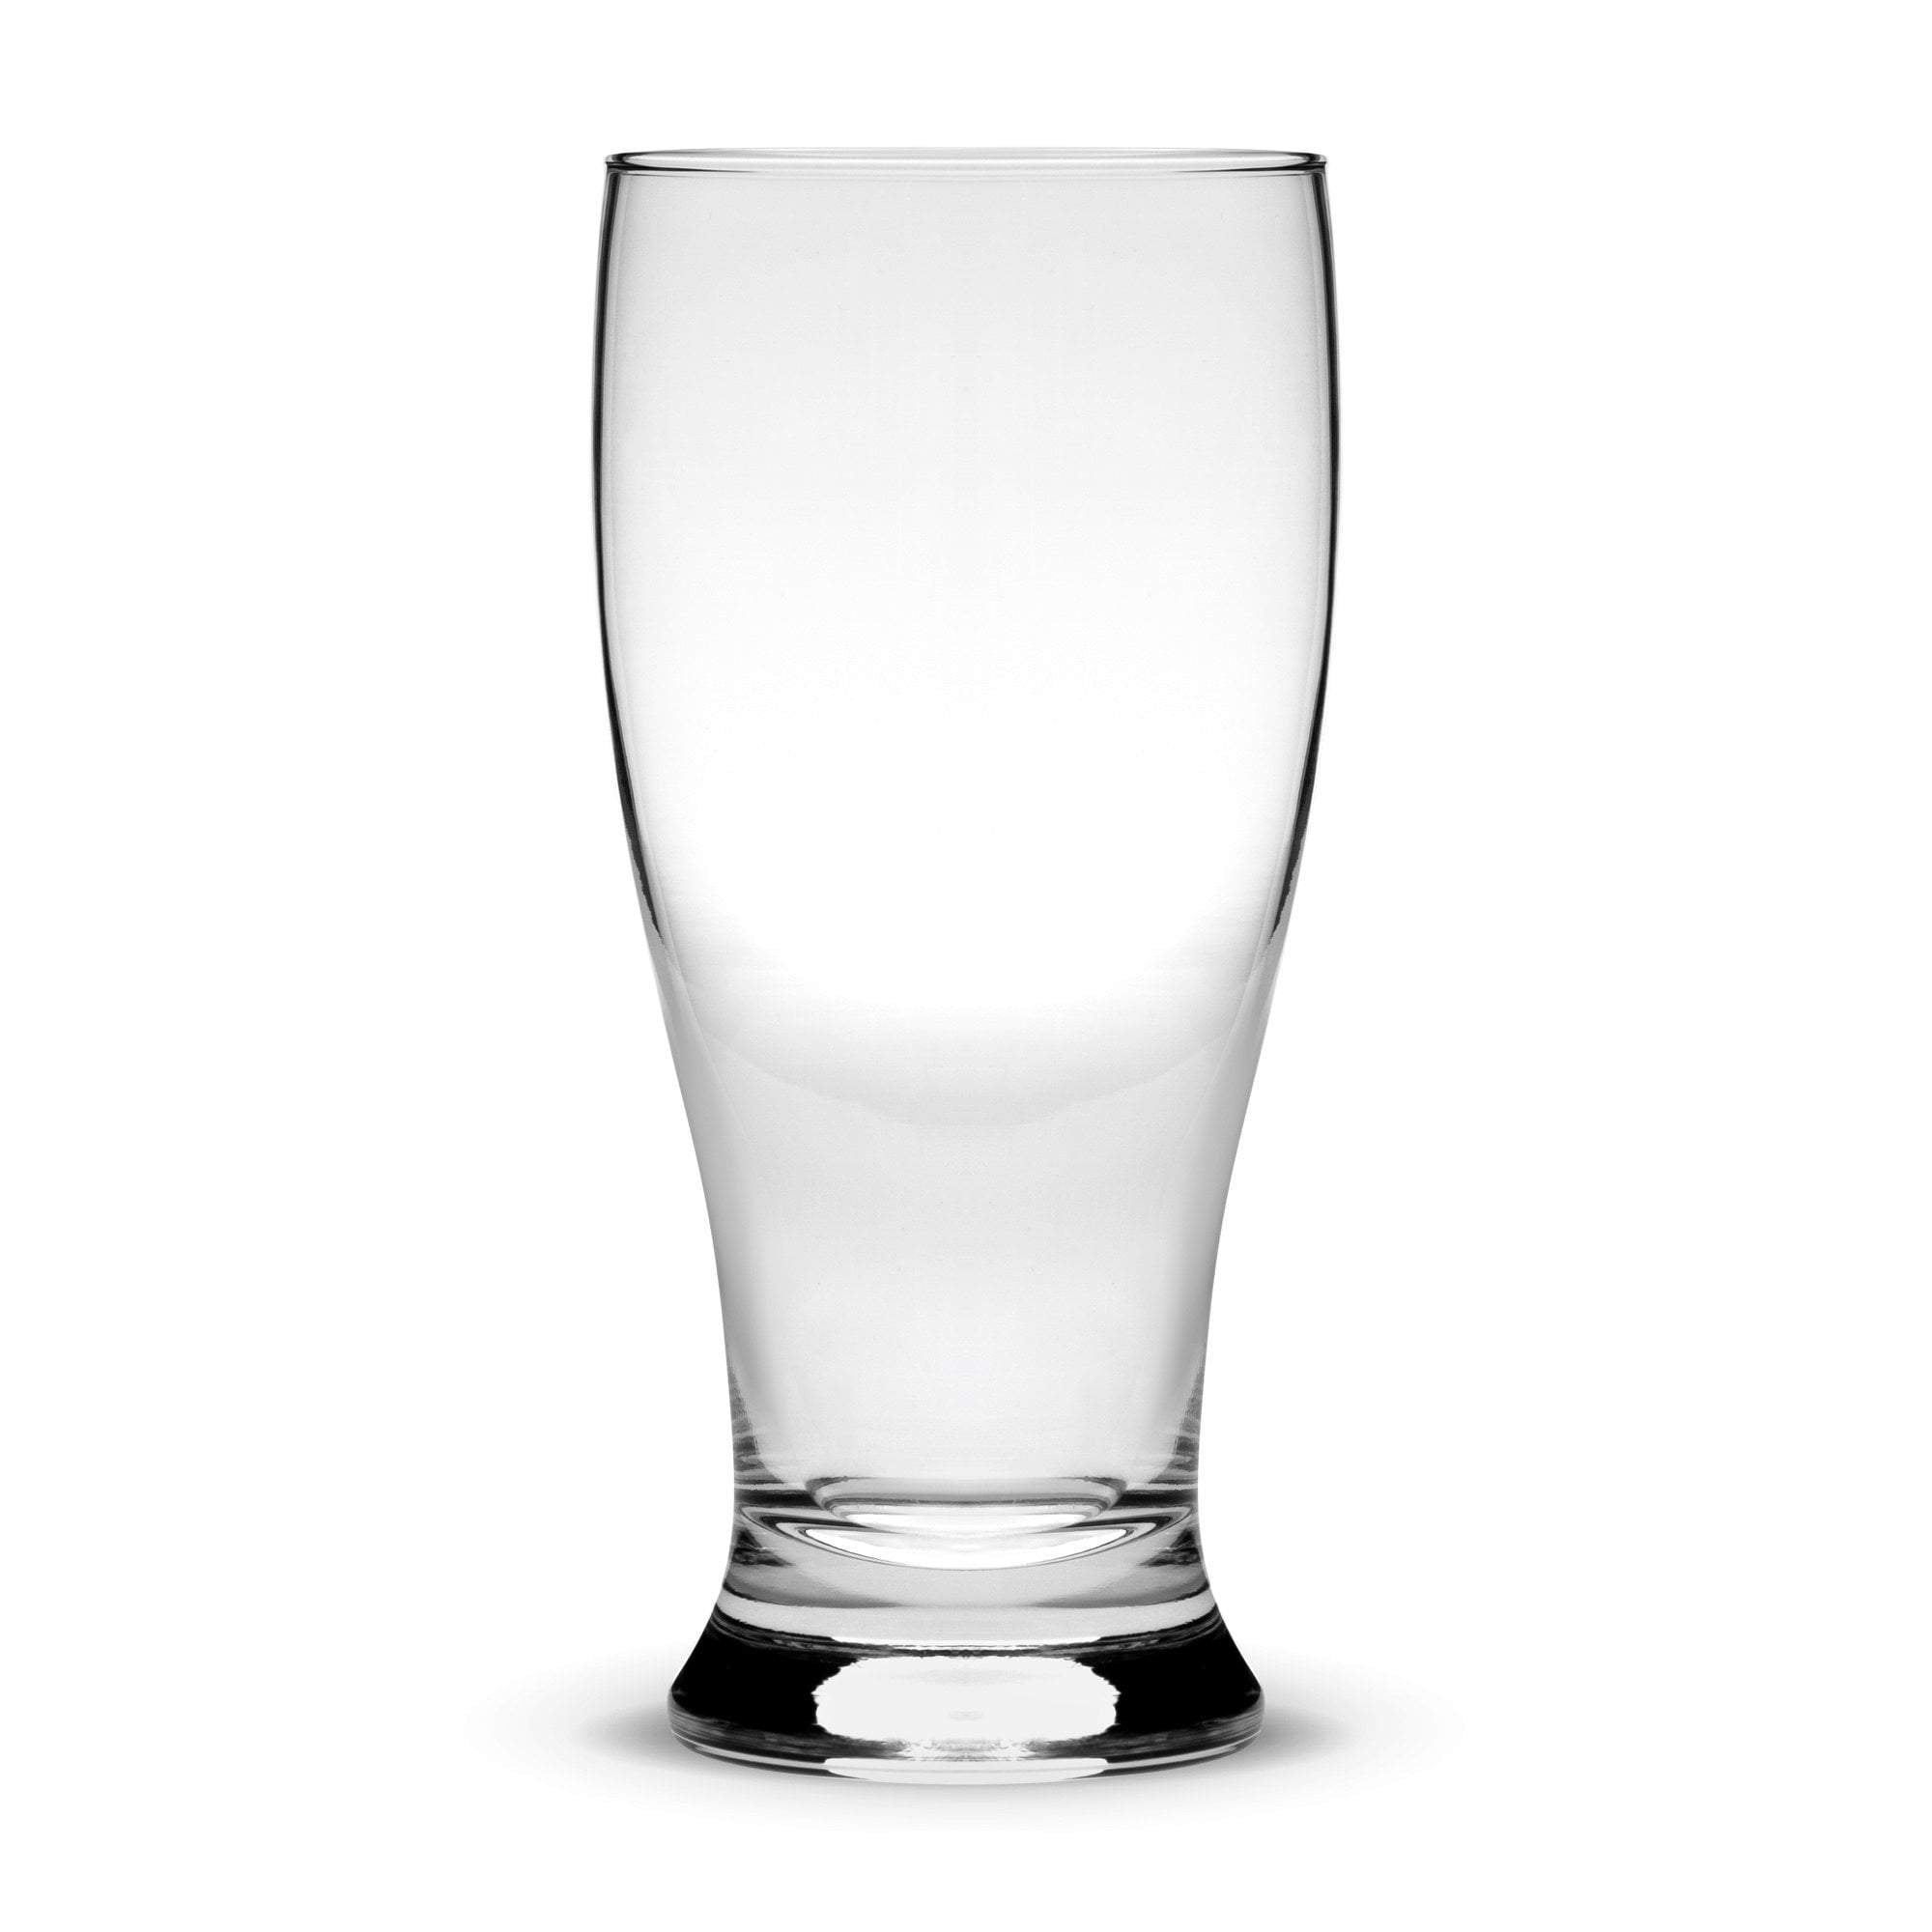  Pilsner Pint Glass, Deep Etched by Integrity Bottles